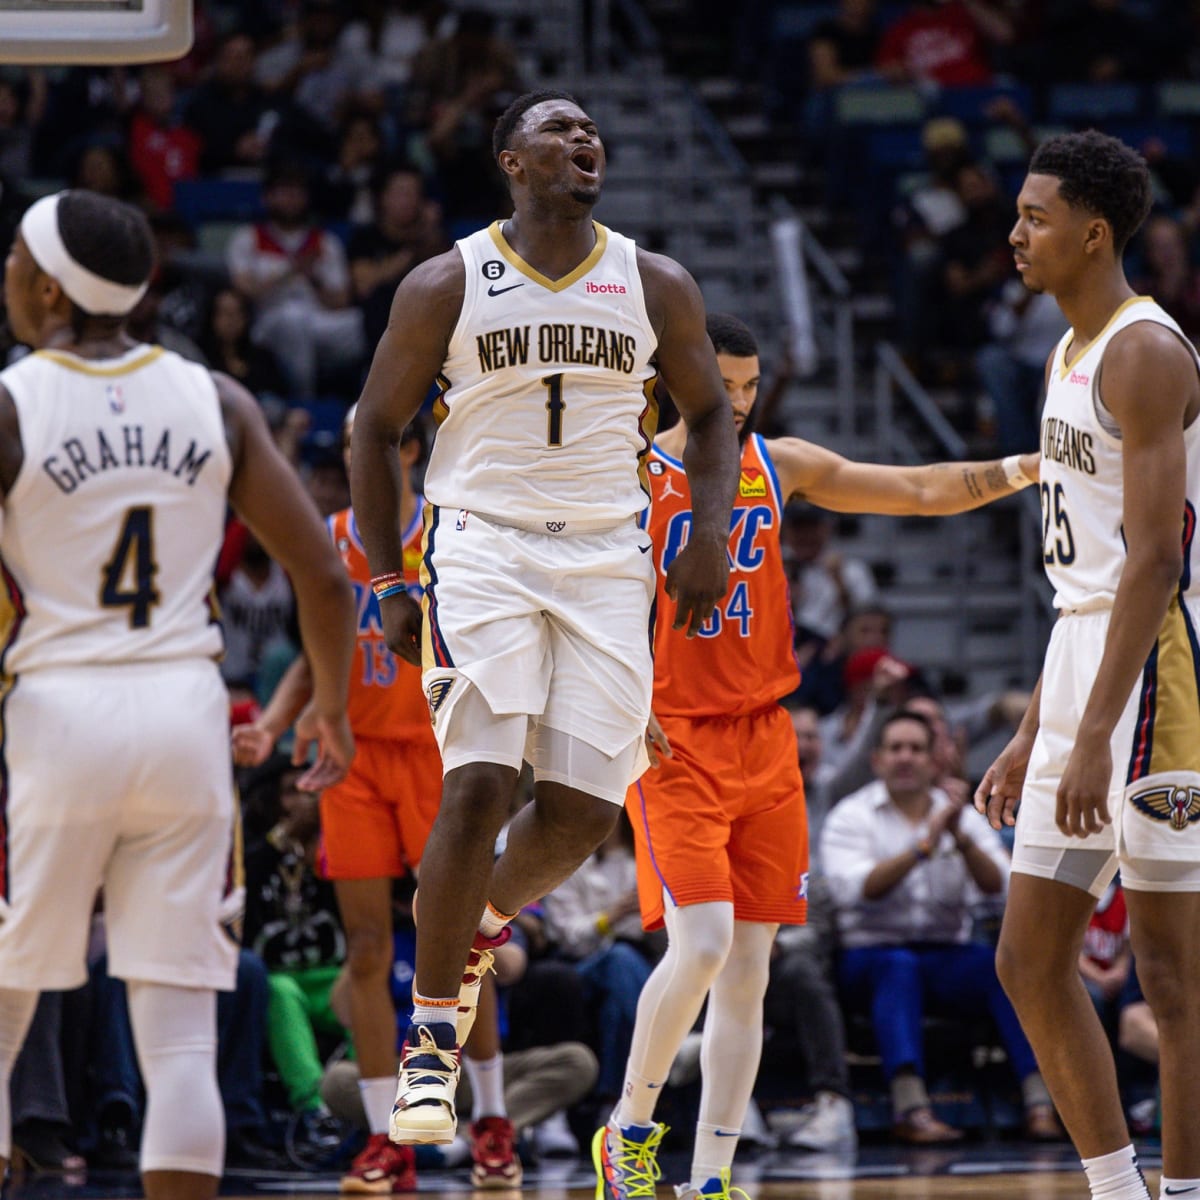 It was just a good energy': Zion Williamson, Pelicans practice for